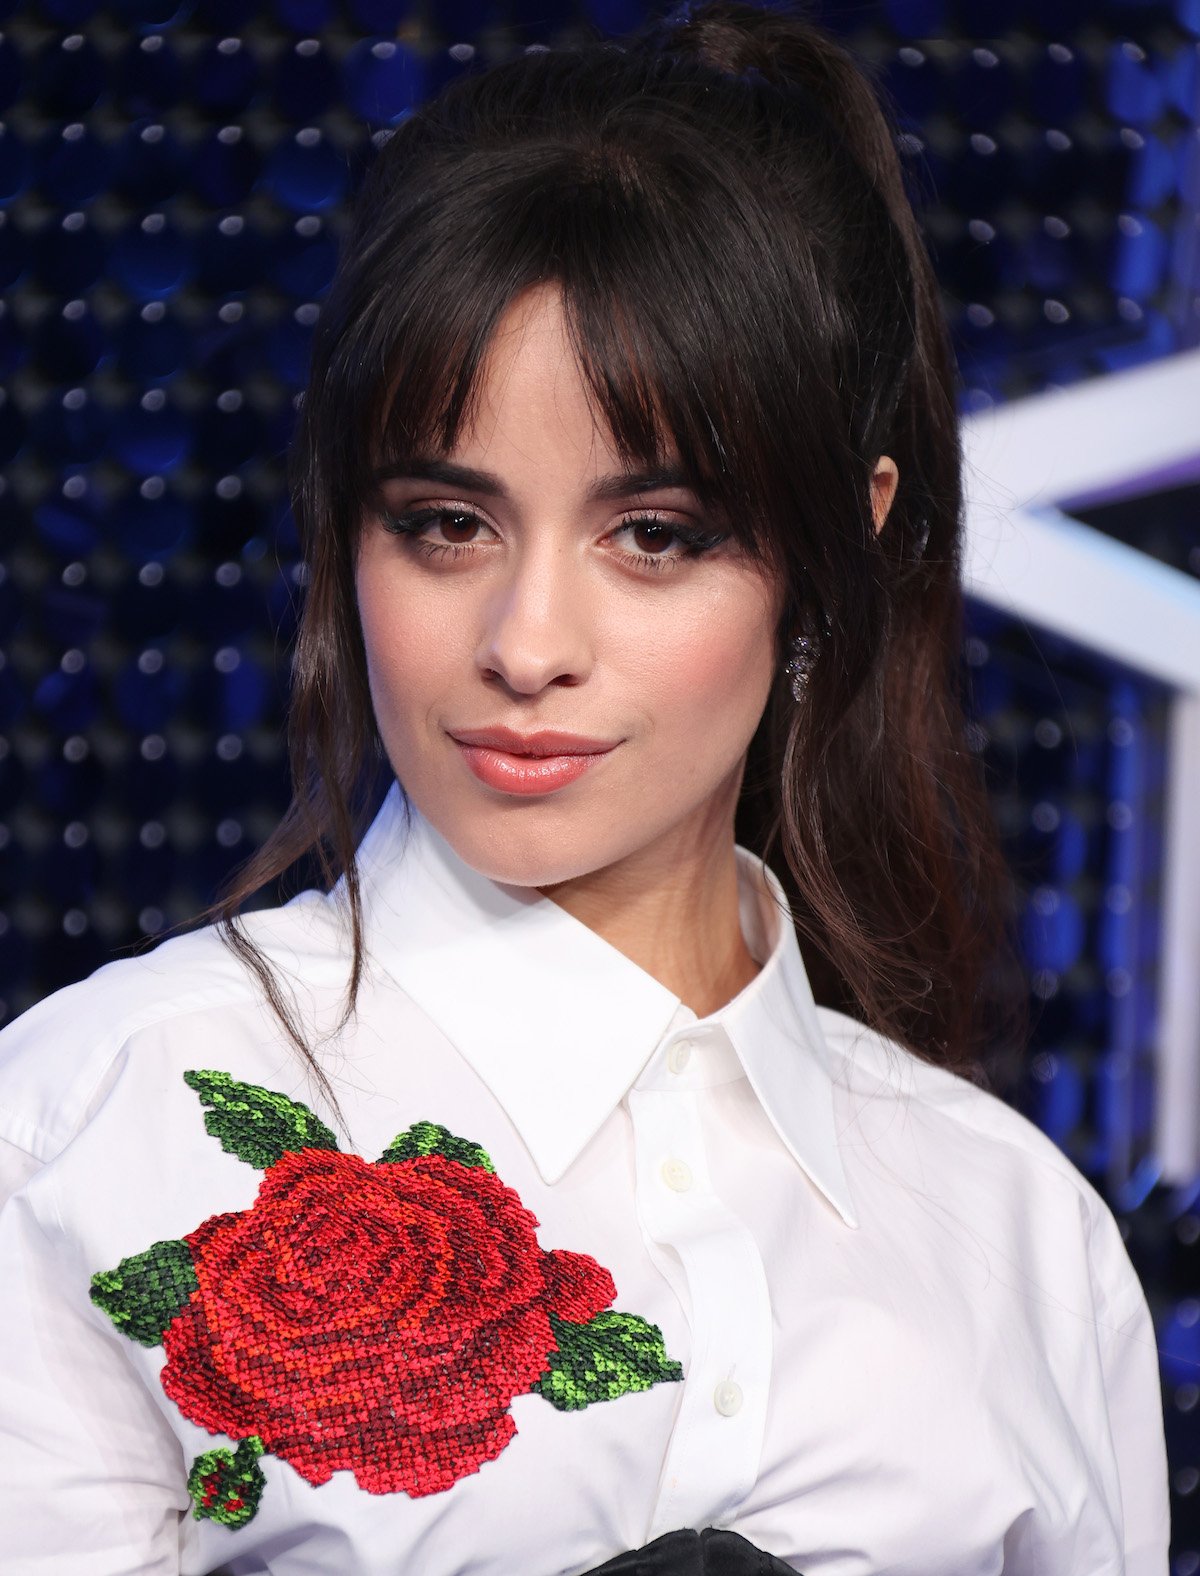 Camila Cabello wears a white top with a large red rose on it at an event.